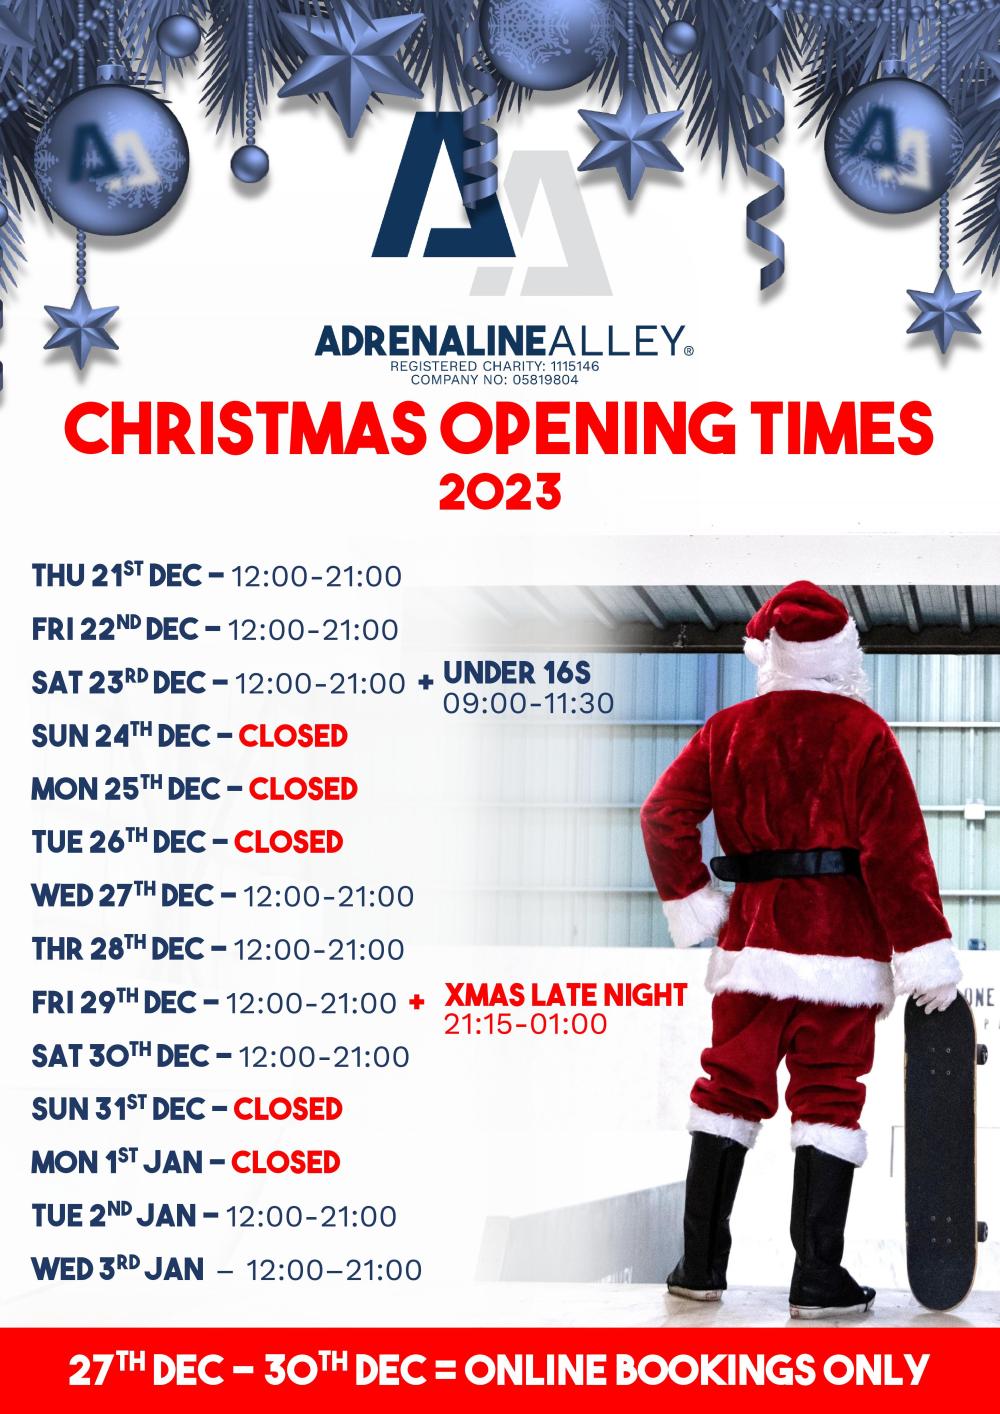 CHRISTMAS OPENING TIMES 2023